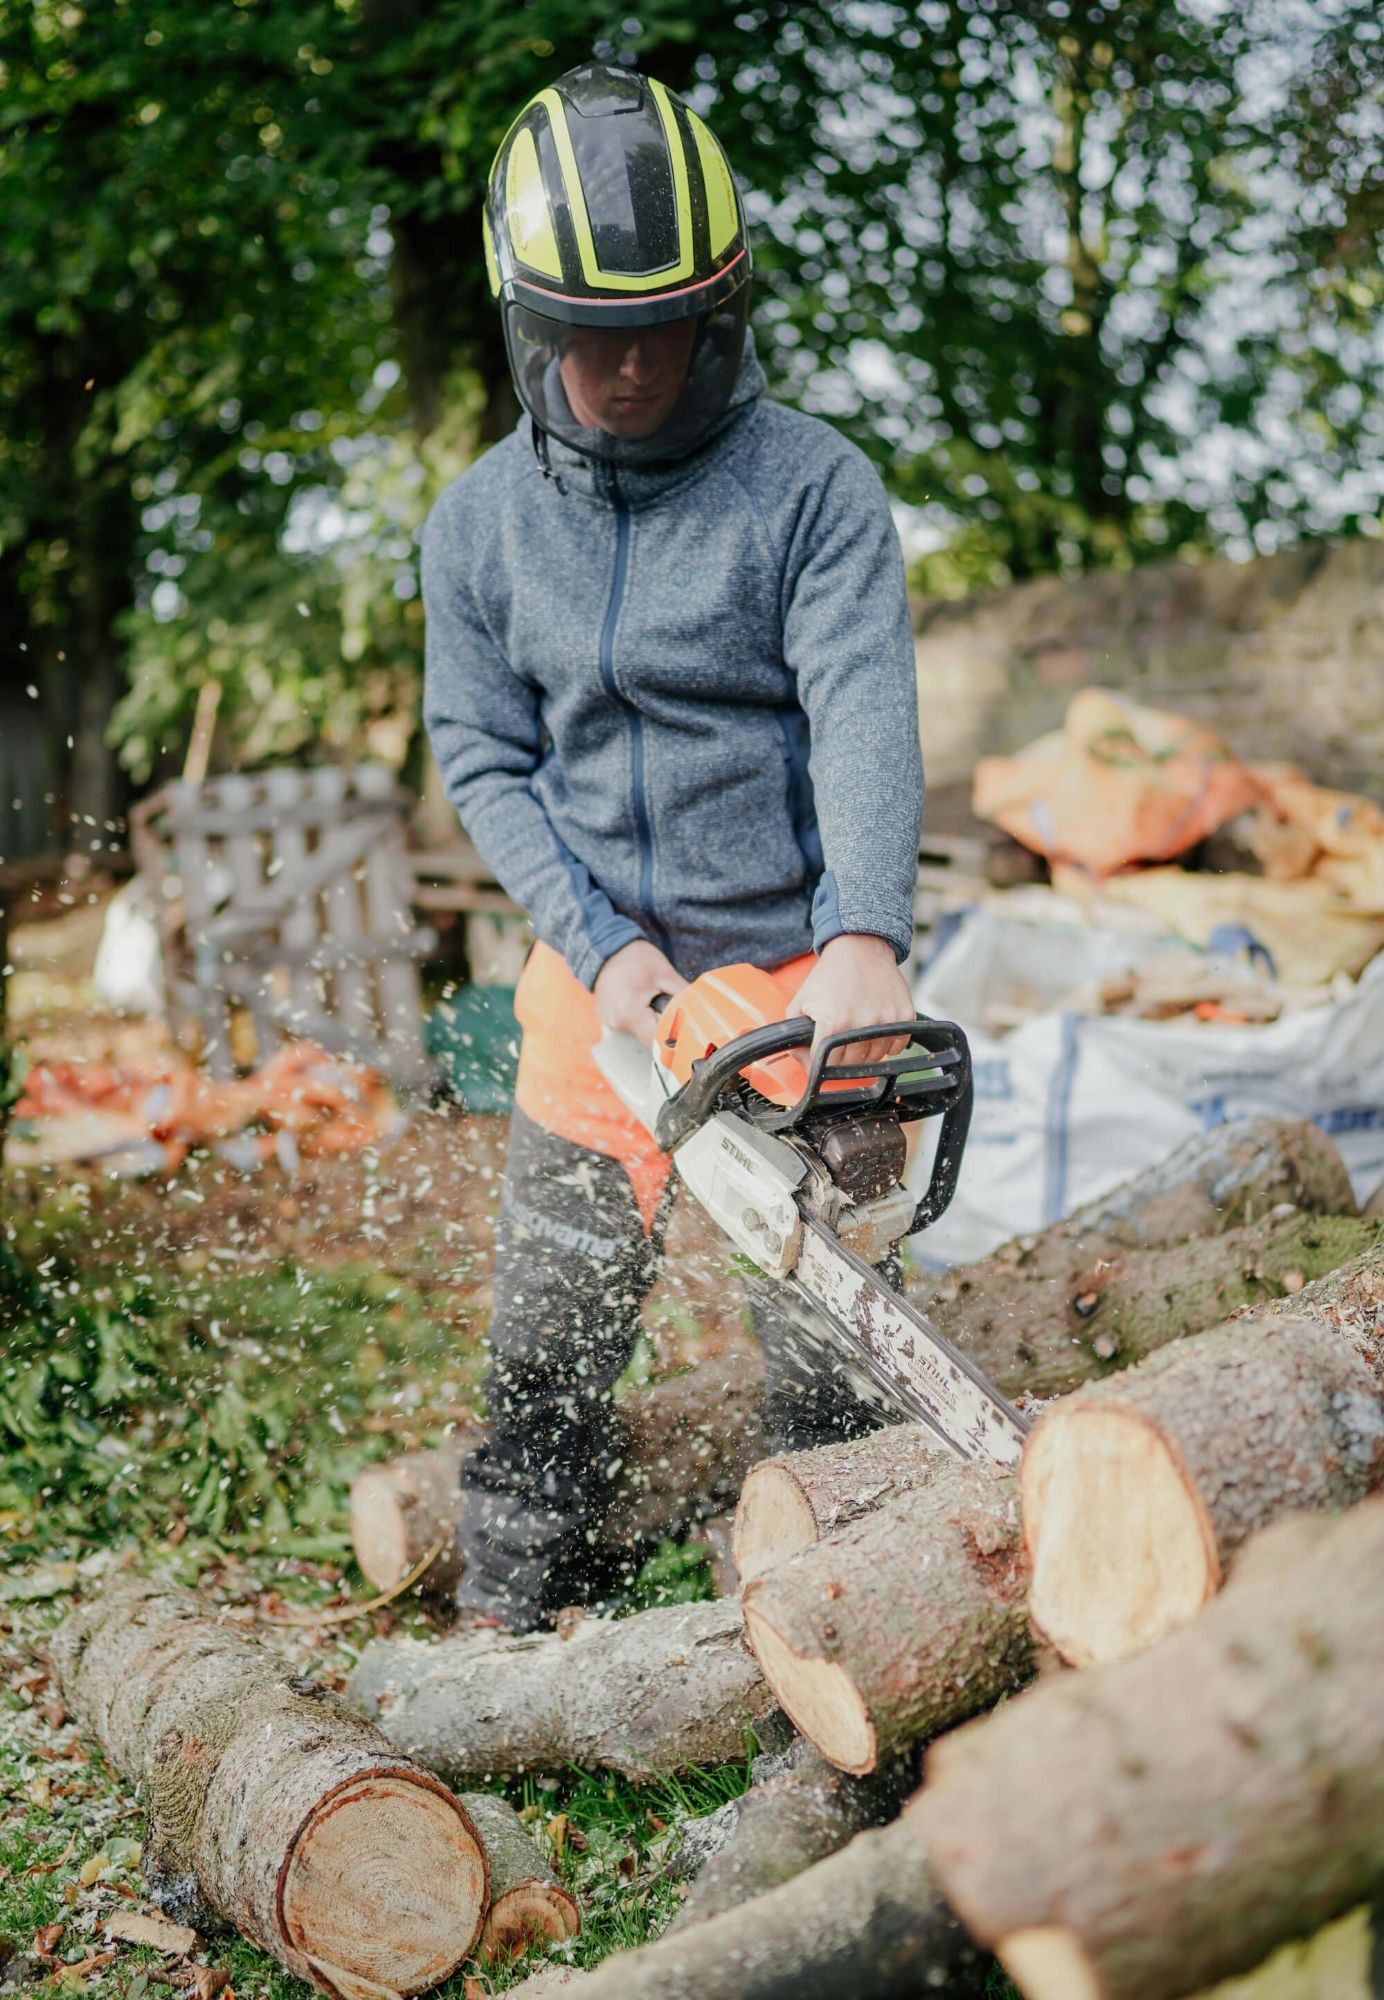 An Arborist processing wood to turn into logs for sale